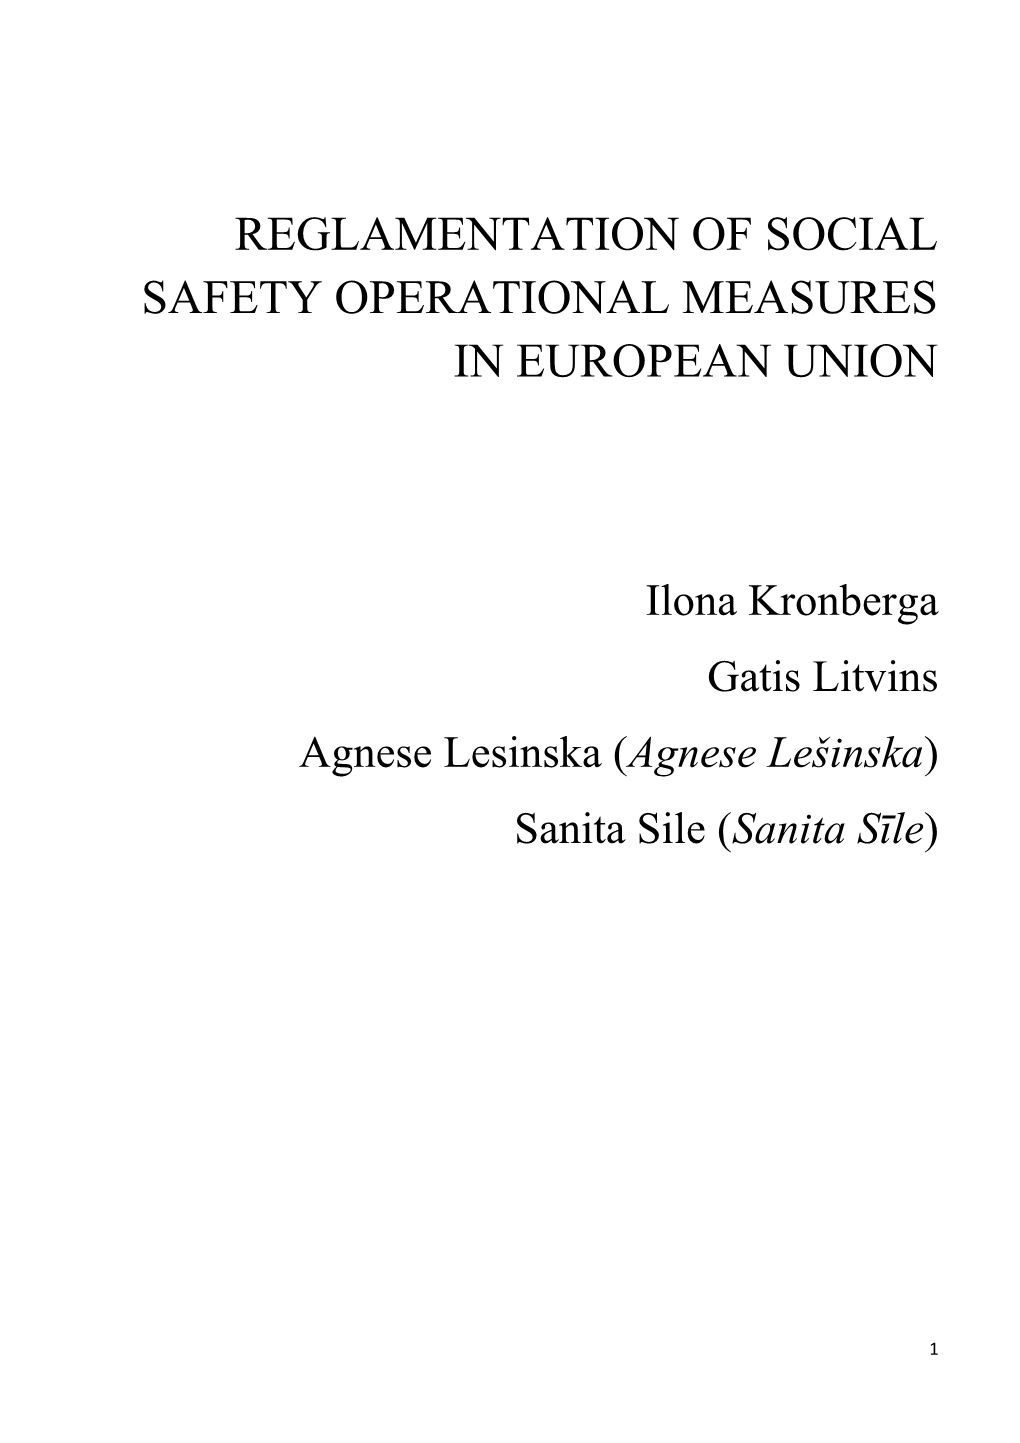 Reglamentation of Social Safety Operational Measures in European Union